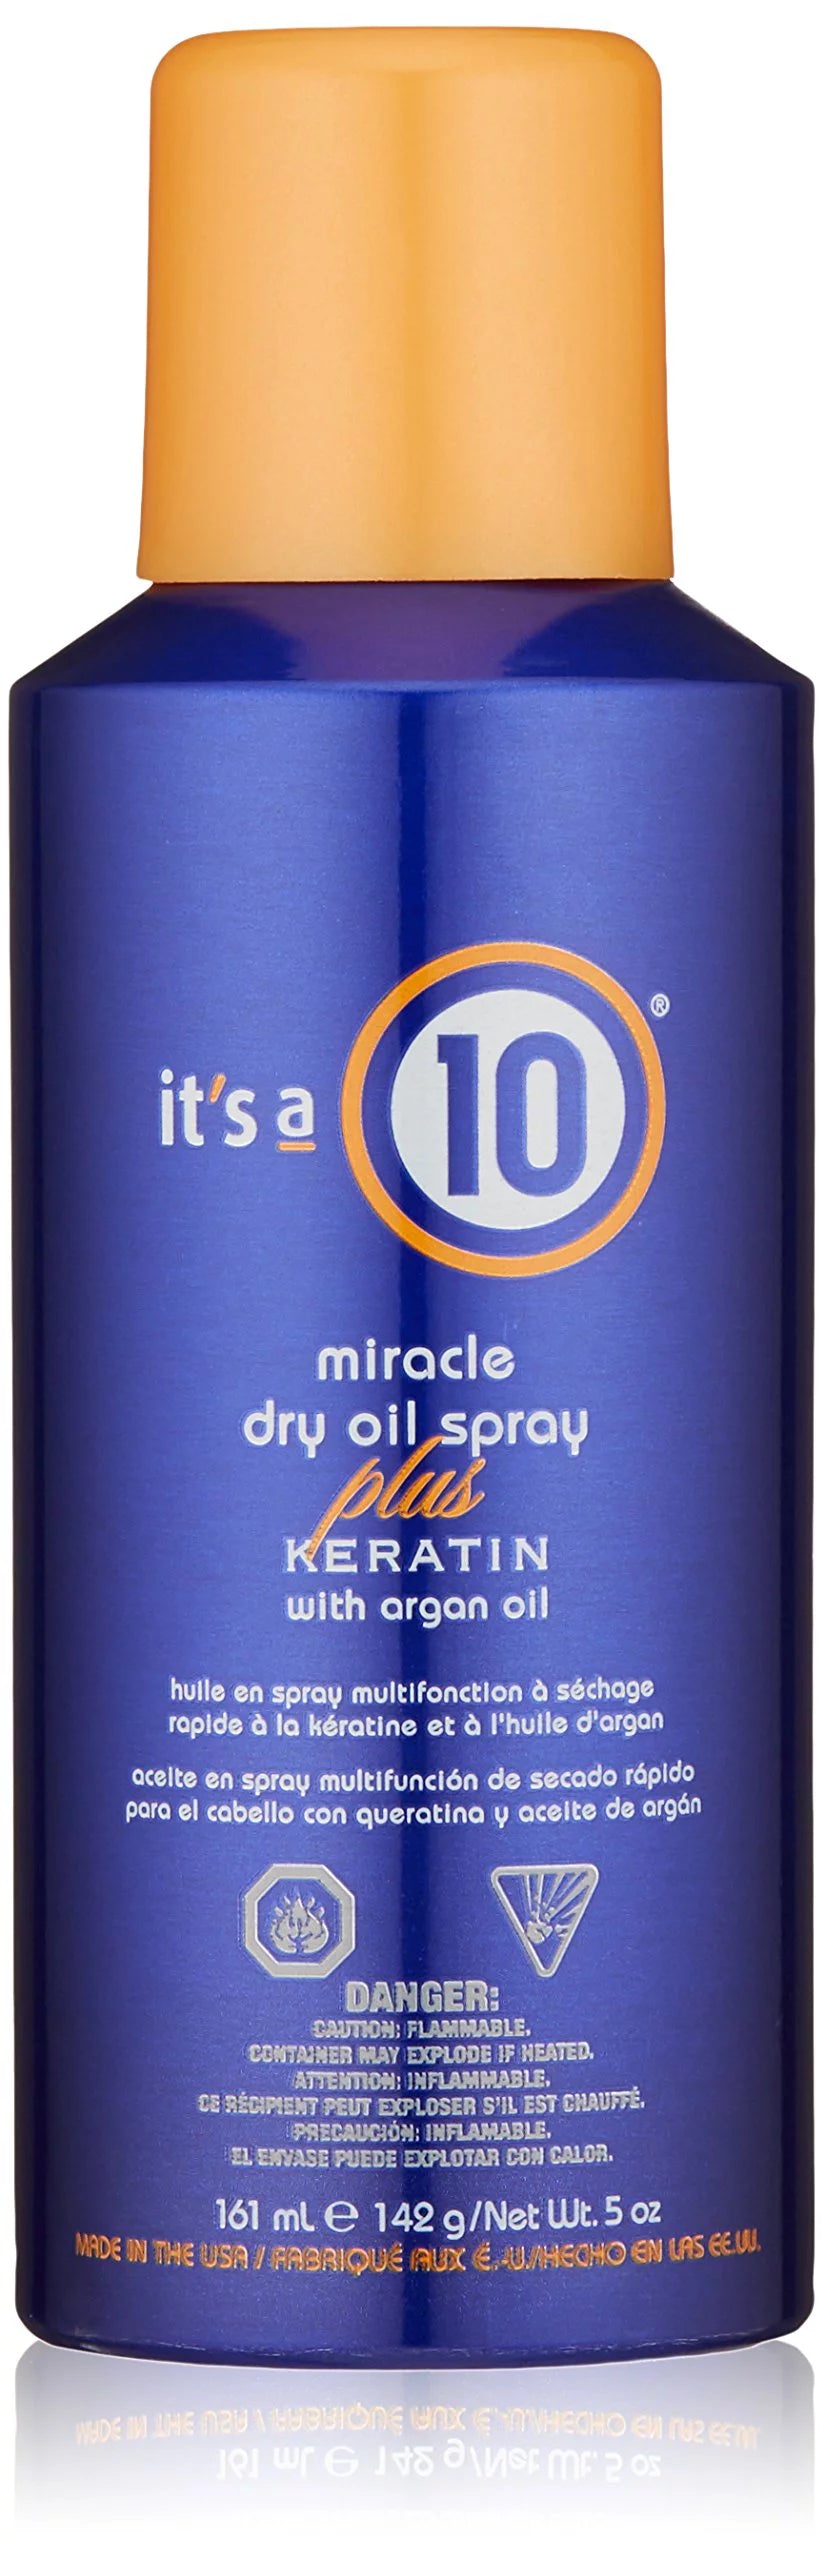 It's a 10 Miracle Dry Oil Spray Plus Keratin with Argan Oil 5 oz bottle image